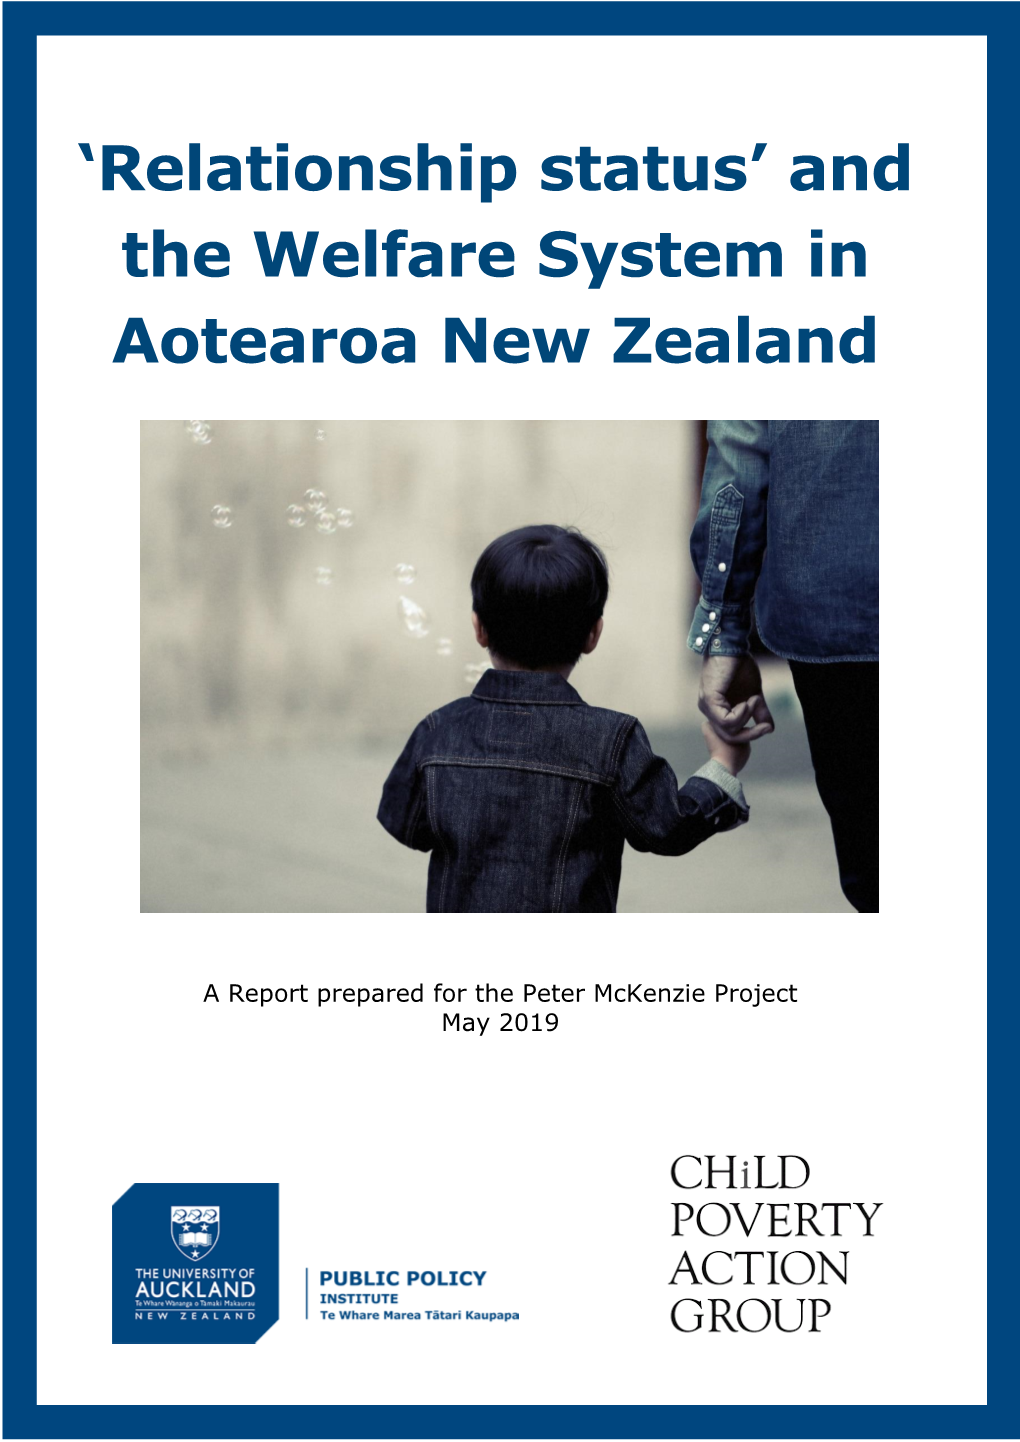 'Relationship Status' and the Welfare System in Aotearoa New Zealand